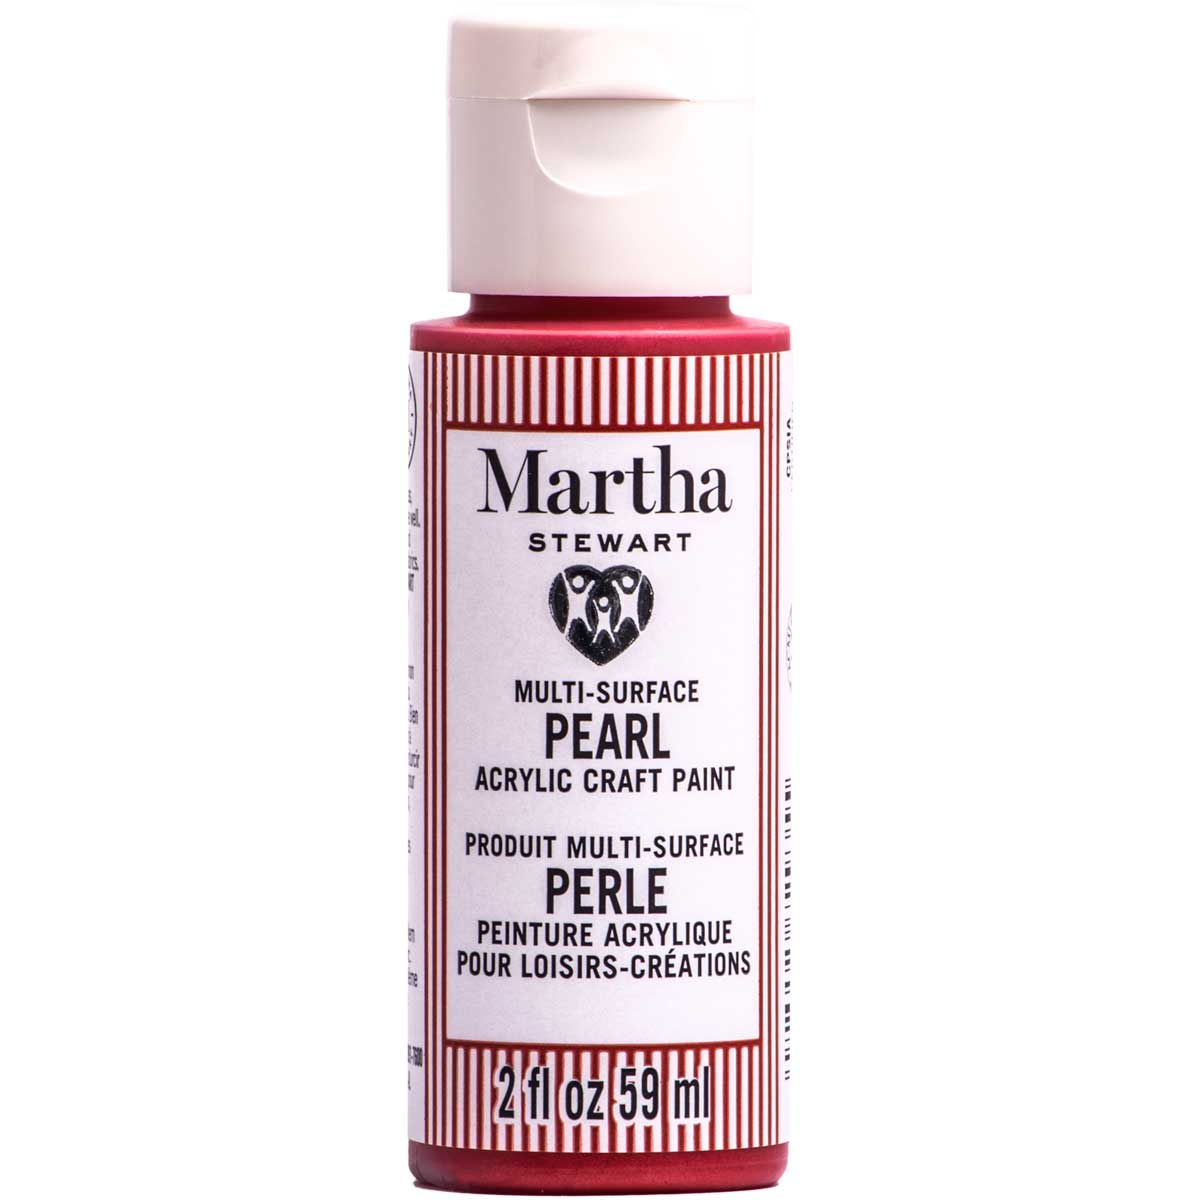 Martha Stewart ® Multi-Surface Pearl Acrylic Craft Paint CPSIA - Red Satine, 2 oz. - 72935